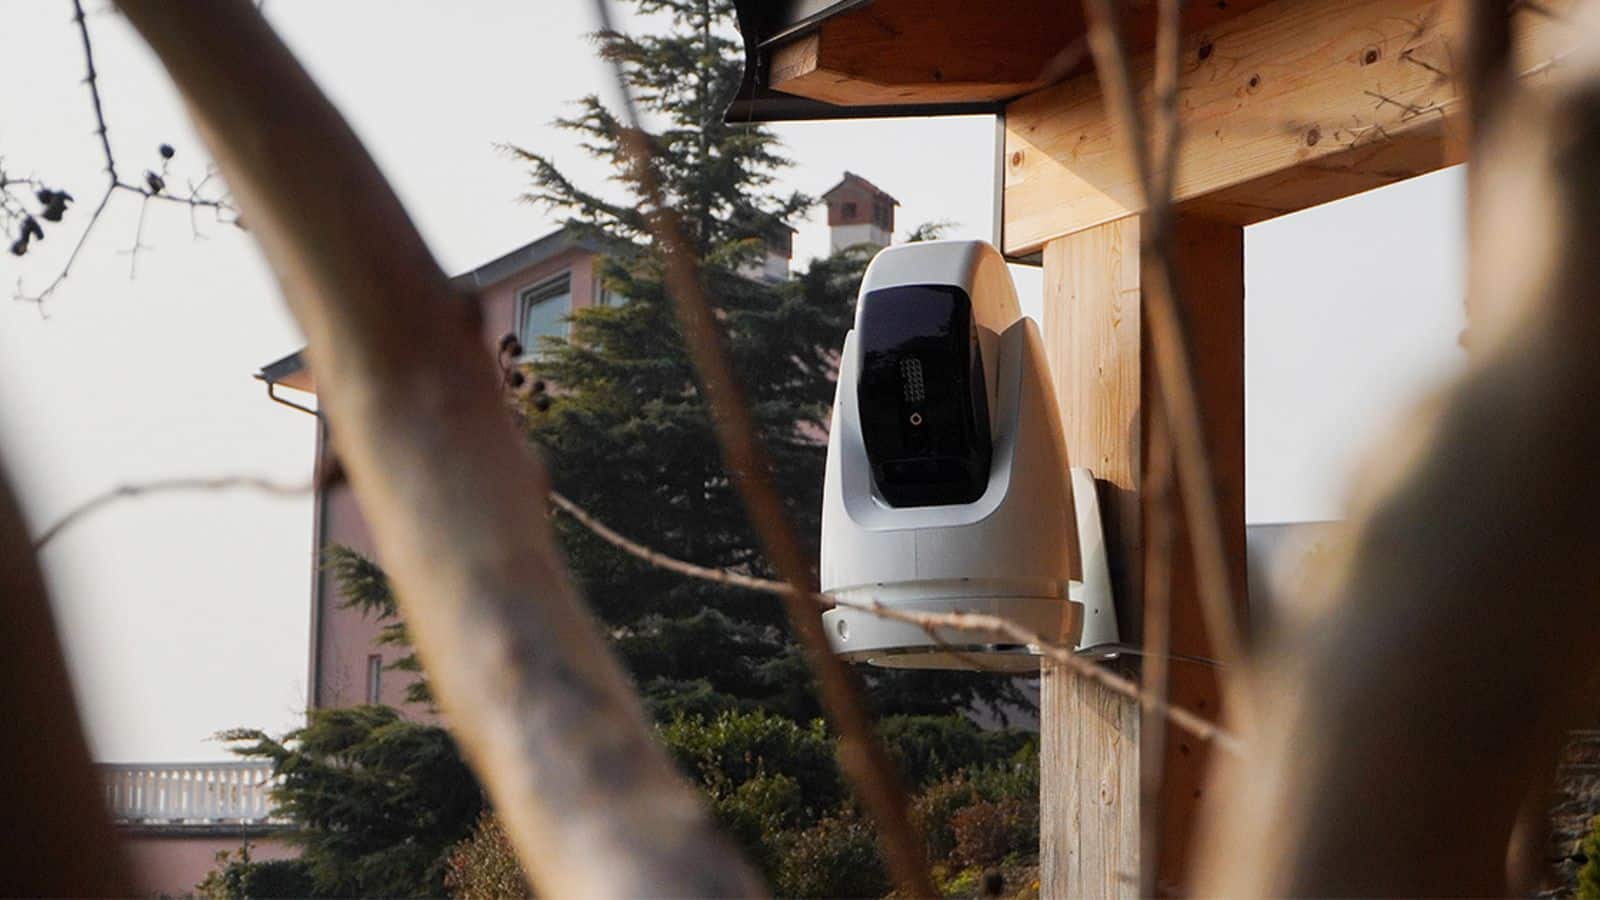 This AI security camera shoots intruders, launches tear gas attacks